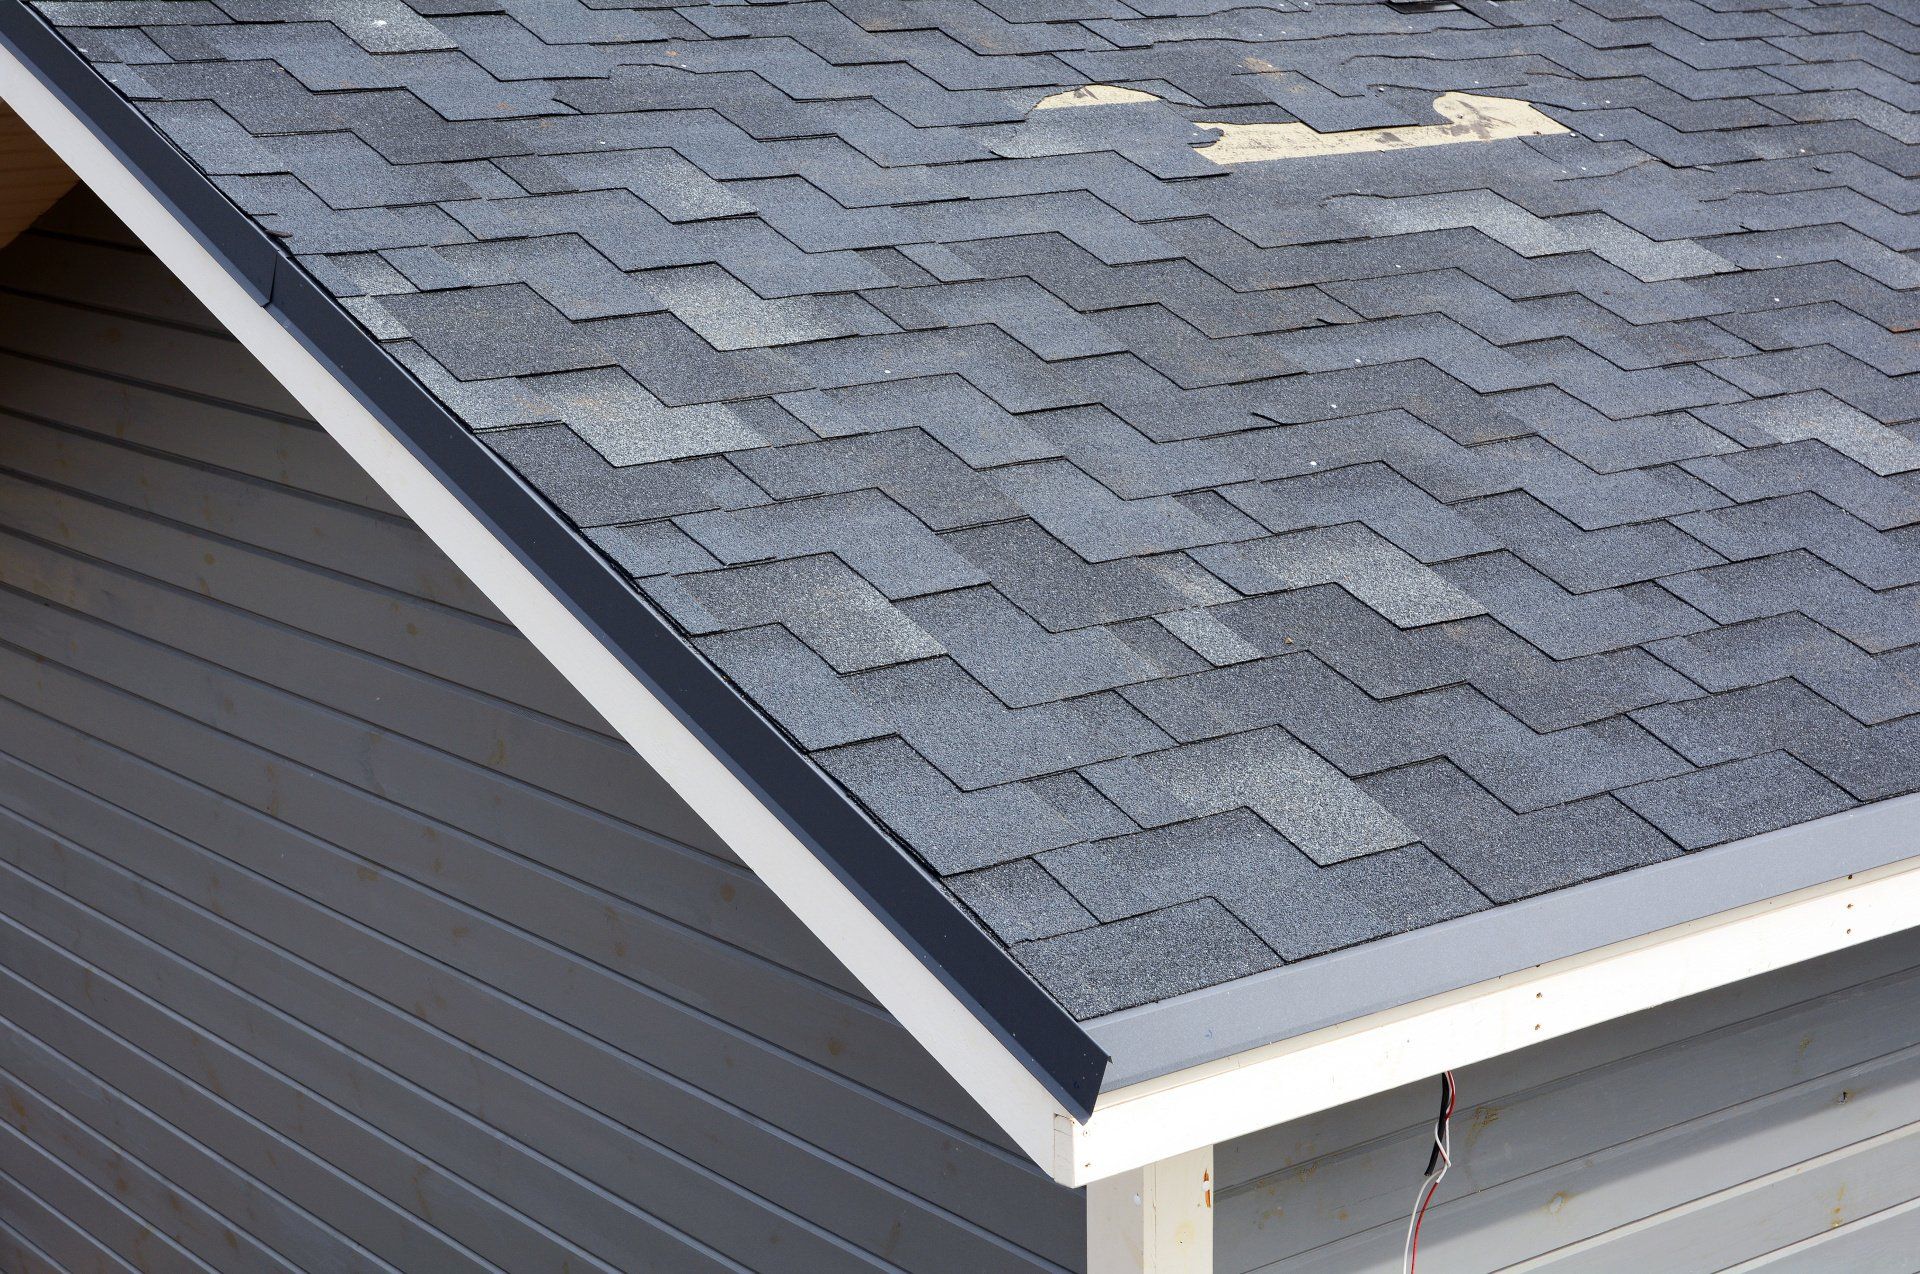 Understanding the Risks of Neglecting Your Roof Replacement